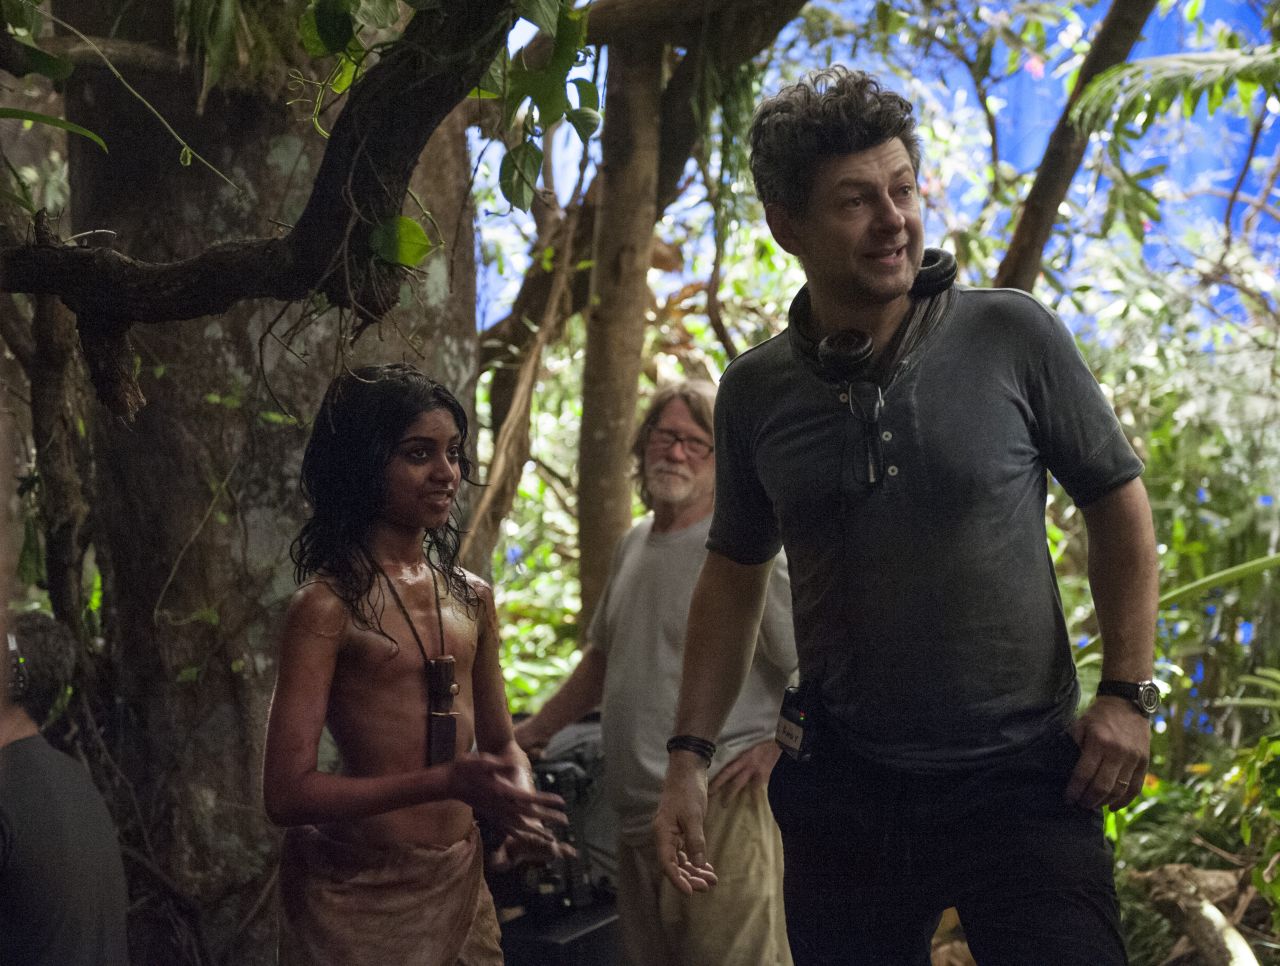 "<strong>Mowgli: Legend of the Jungle"</strong>: Rohan Chand  stars as "Mowgli" and Andy Serkis directs this film based on the beloved Rudyard Kipling stories about a child raised by a wolf pack in the jungles of India who must come to terms with his human origins. <strong>(Netflix) </strong>